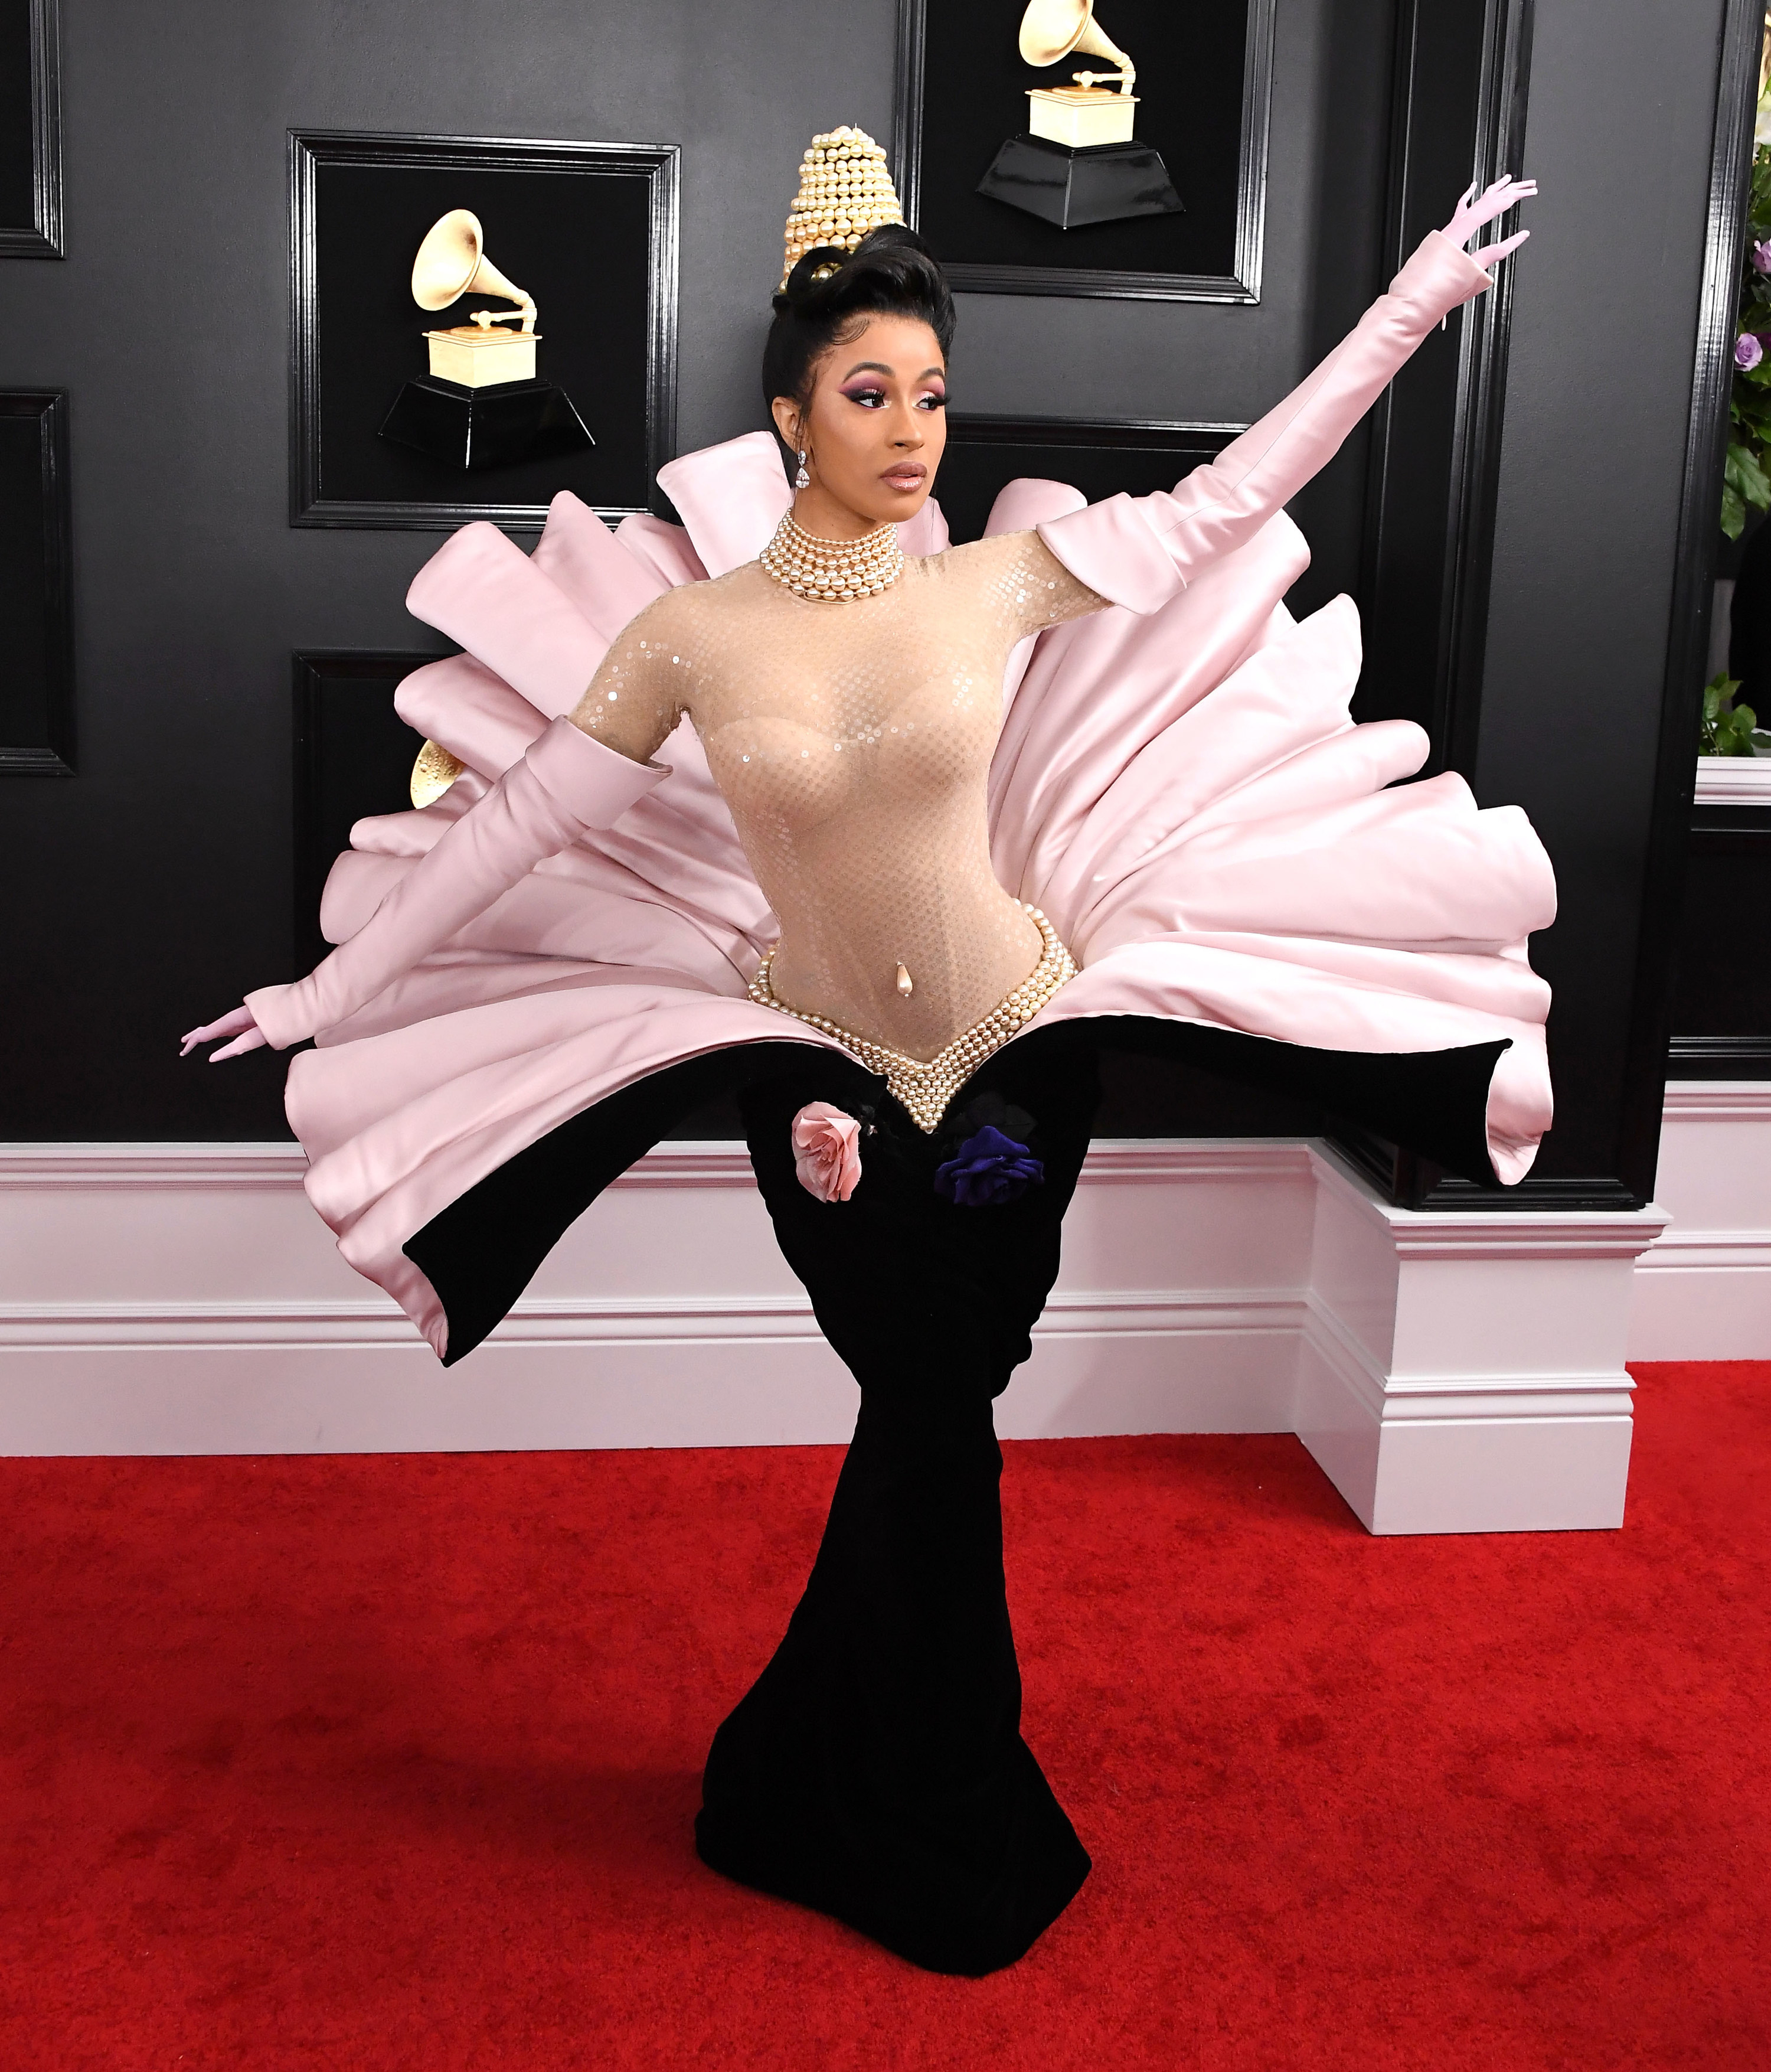 Cardi B strikes a pose in Mugler at the Grammys on February 10, 2019